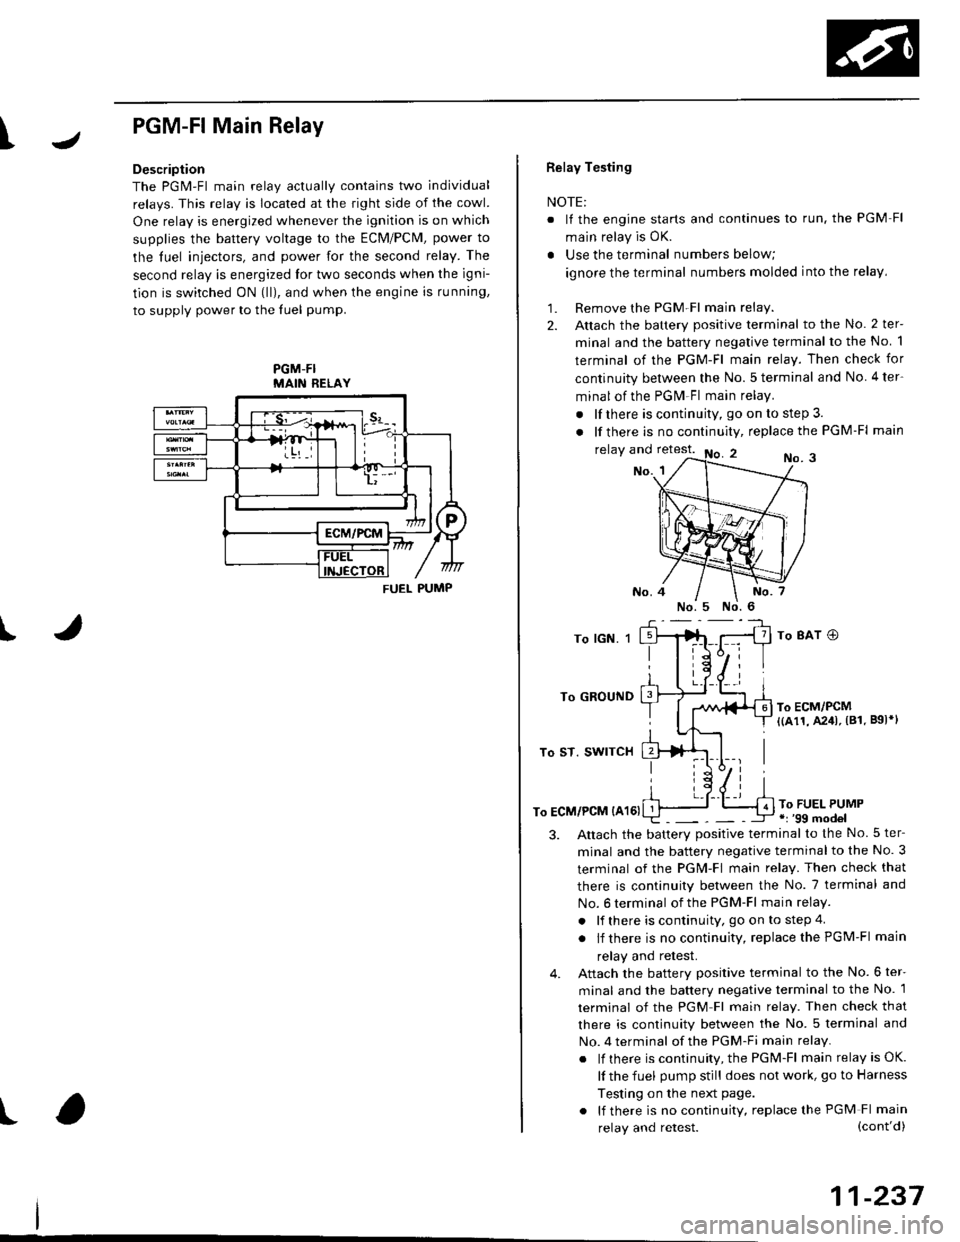 HONDA CIVIC 1996 6.G Service Manual I
PGM-FlMain Relay
Description
The PGM-Fl main relav actuallv contains two individual
relays. This relay is located at the right side of the cowl.
One relay is energized whenever the ignition is on wh